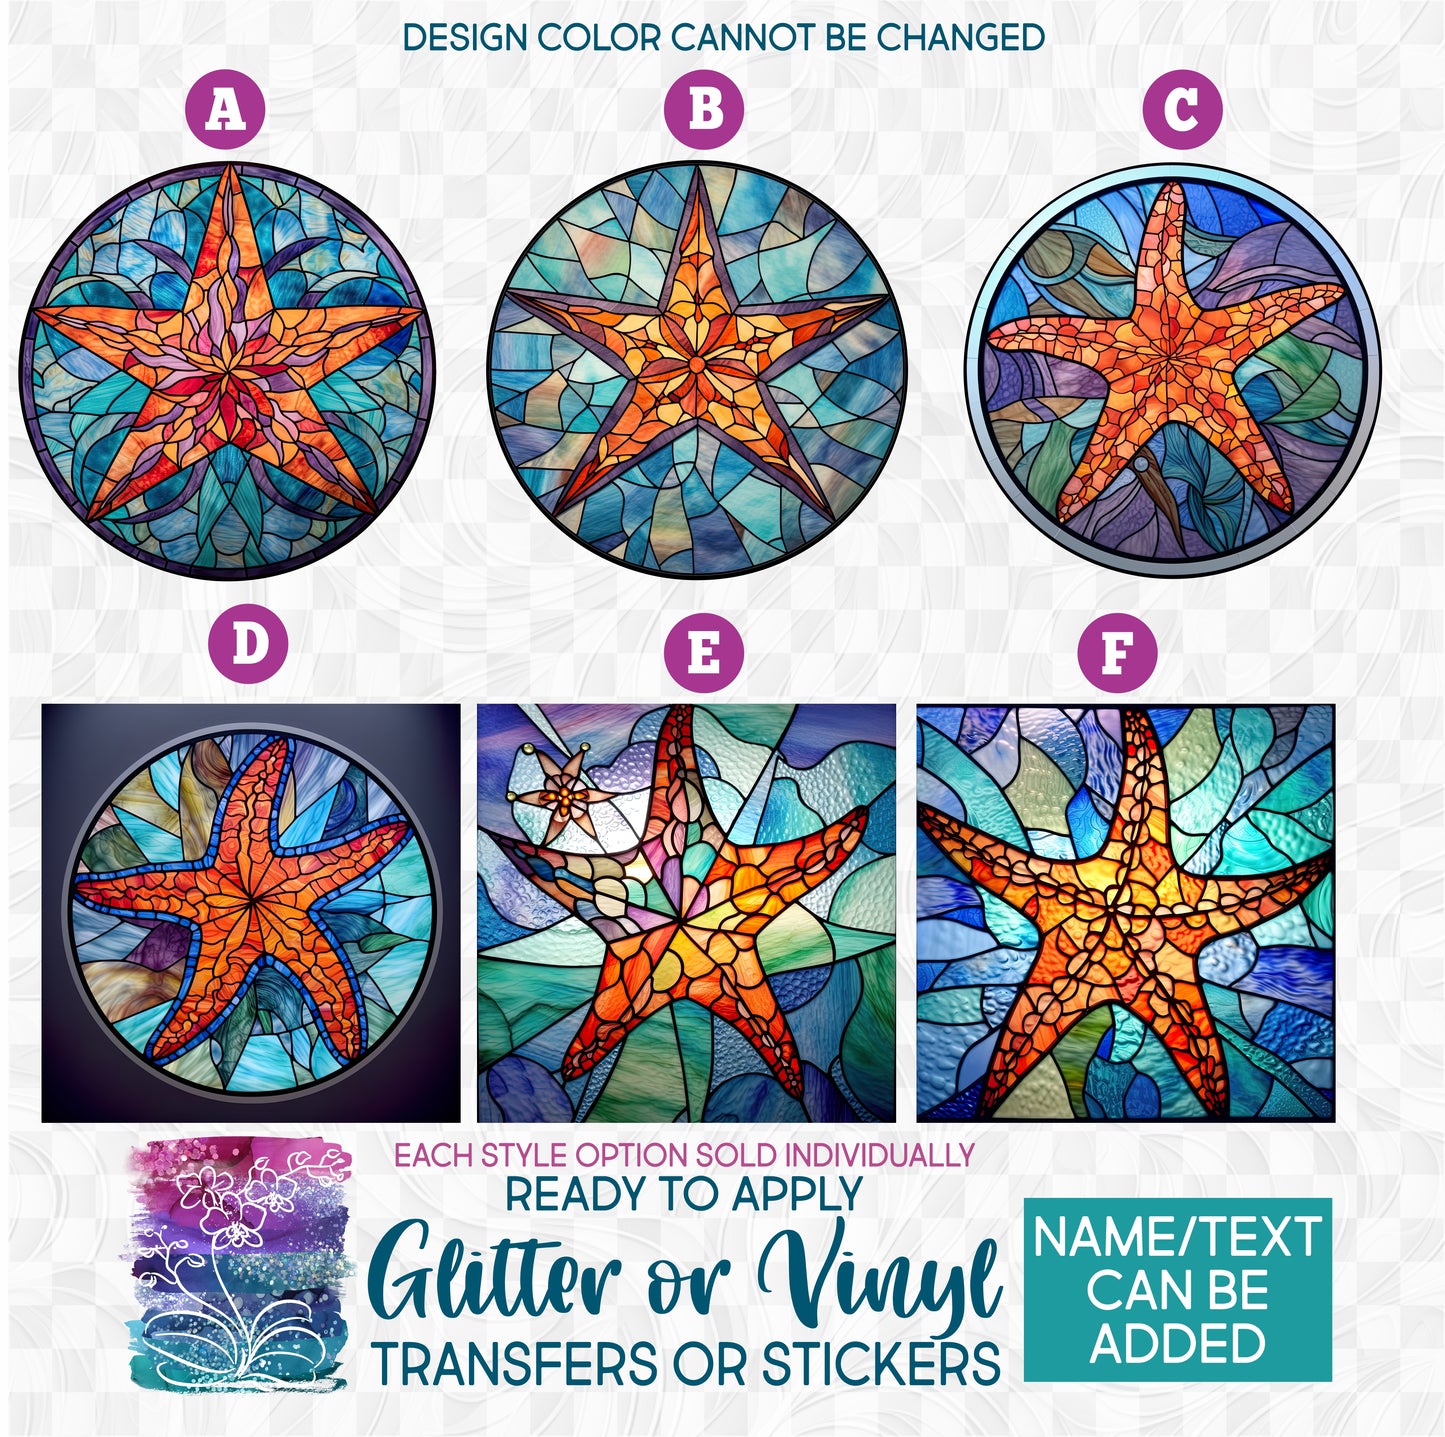 (s150-22) Stained-Glass Starfish Glitter or Vinyl Iron-On Transfer or Sticker